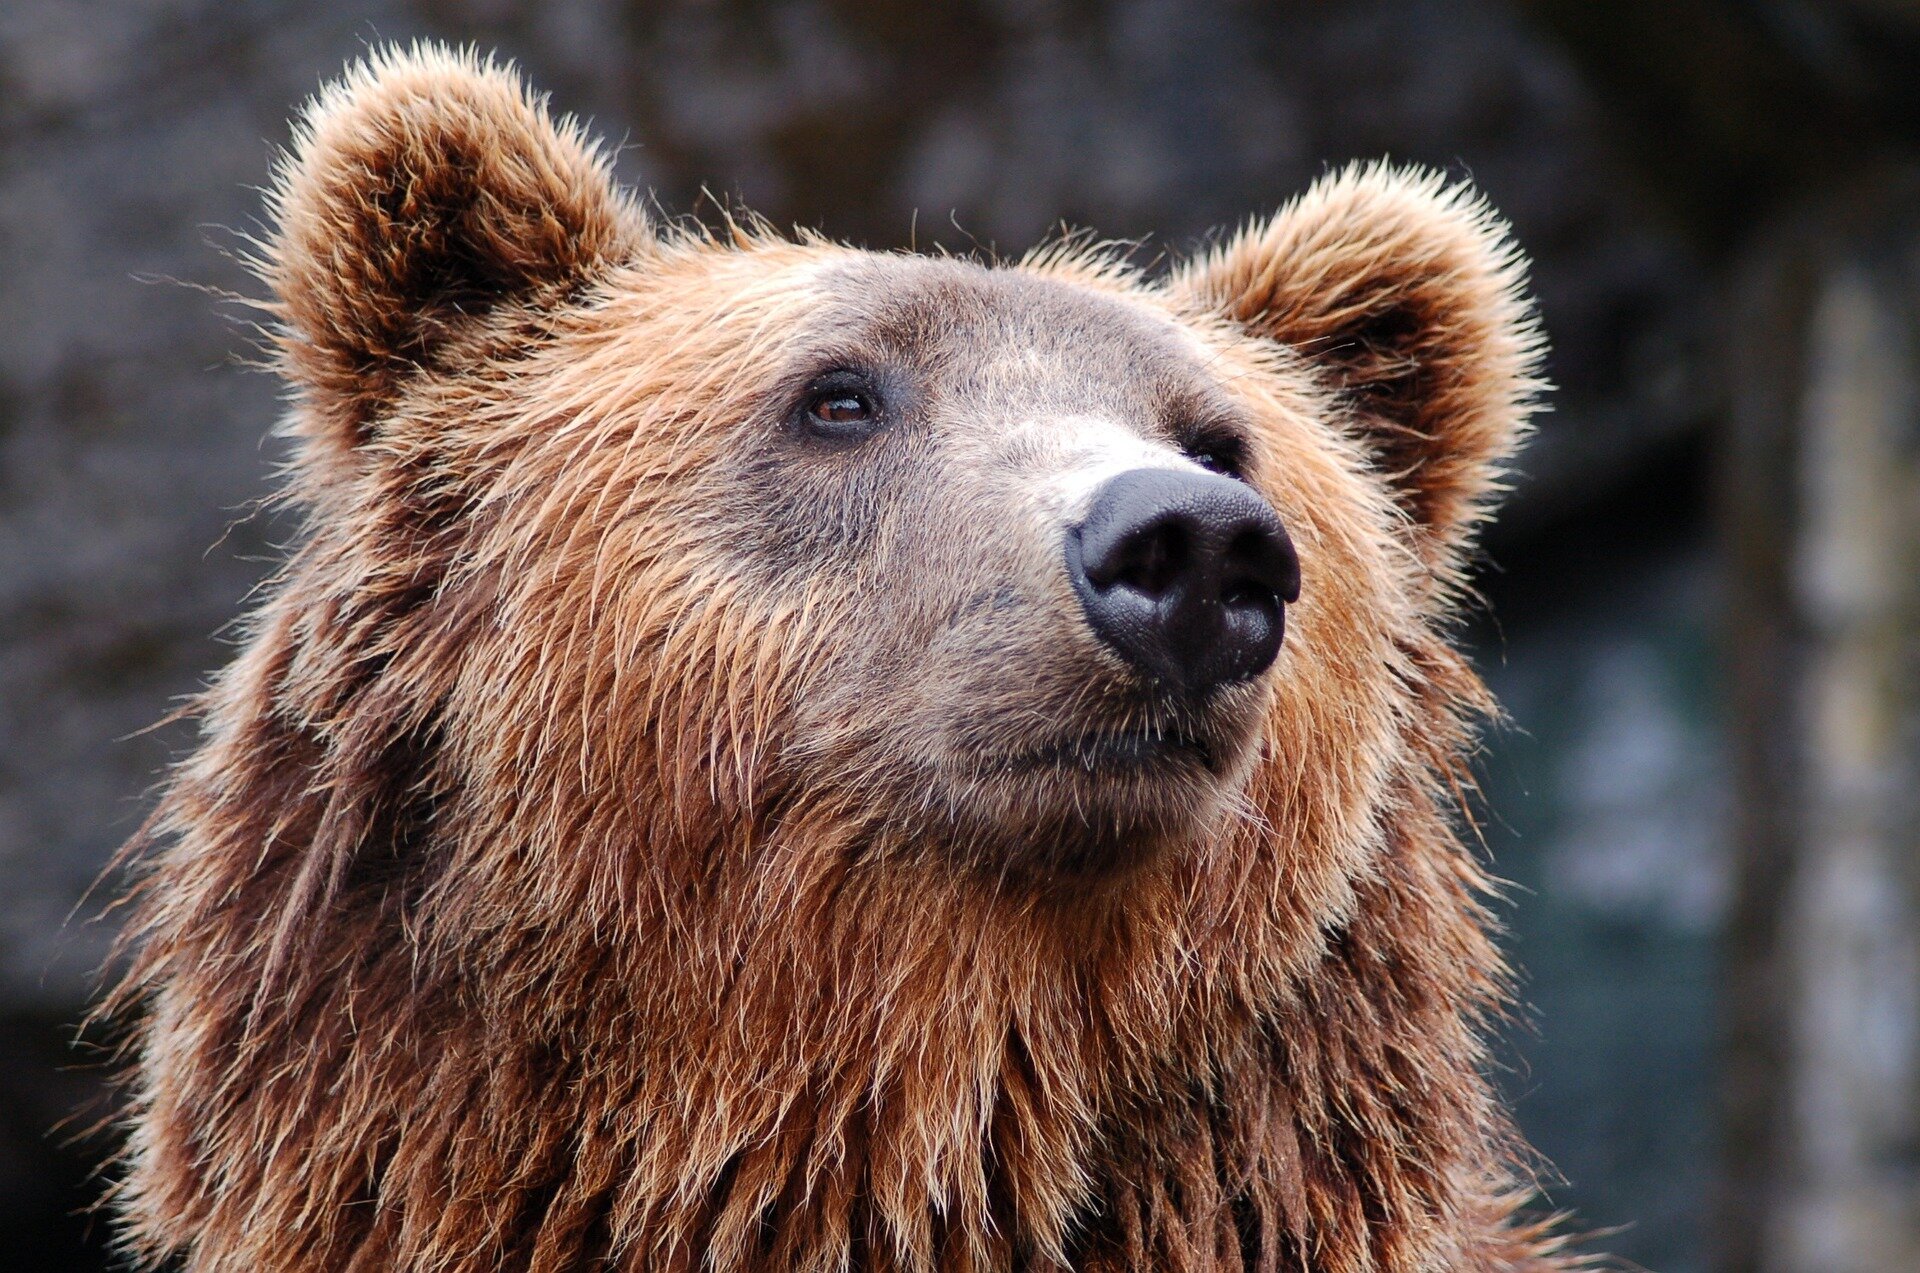 Support reintroducing grizzly bears to the North Cascades